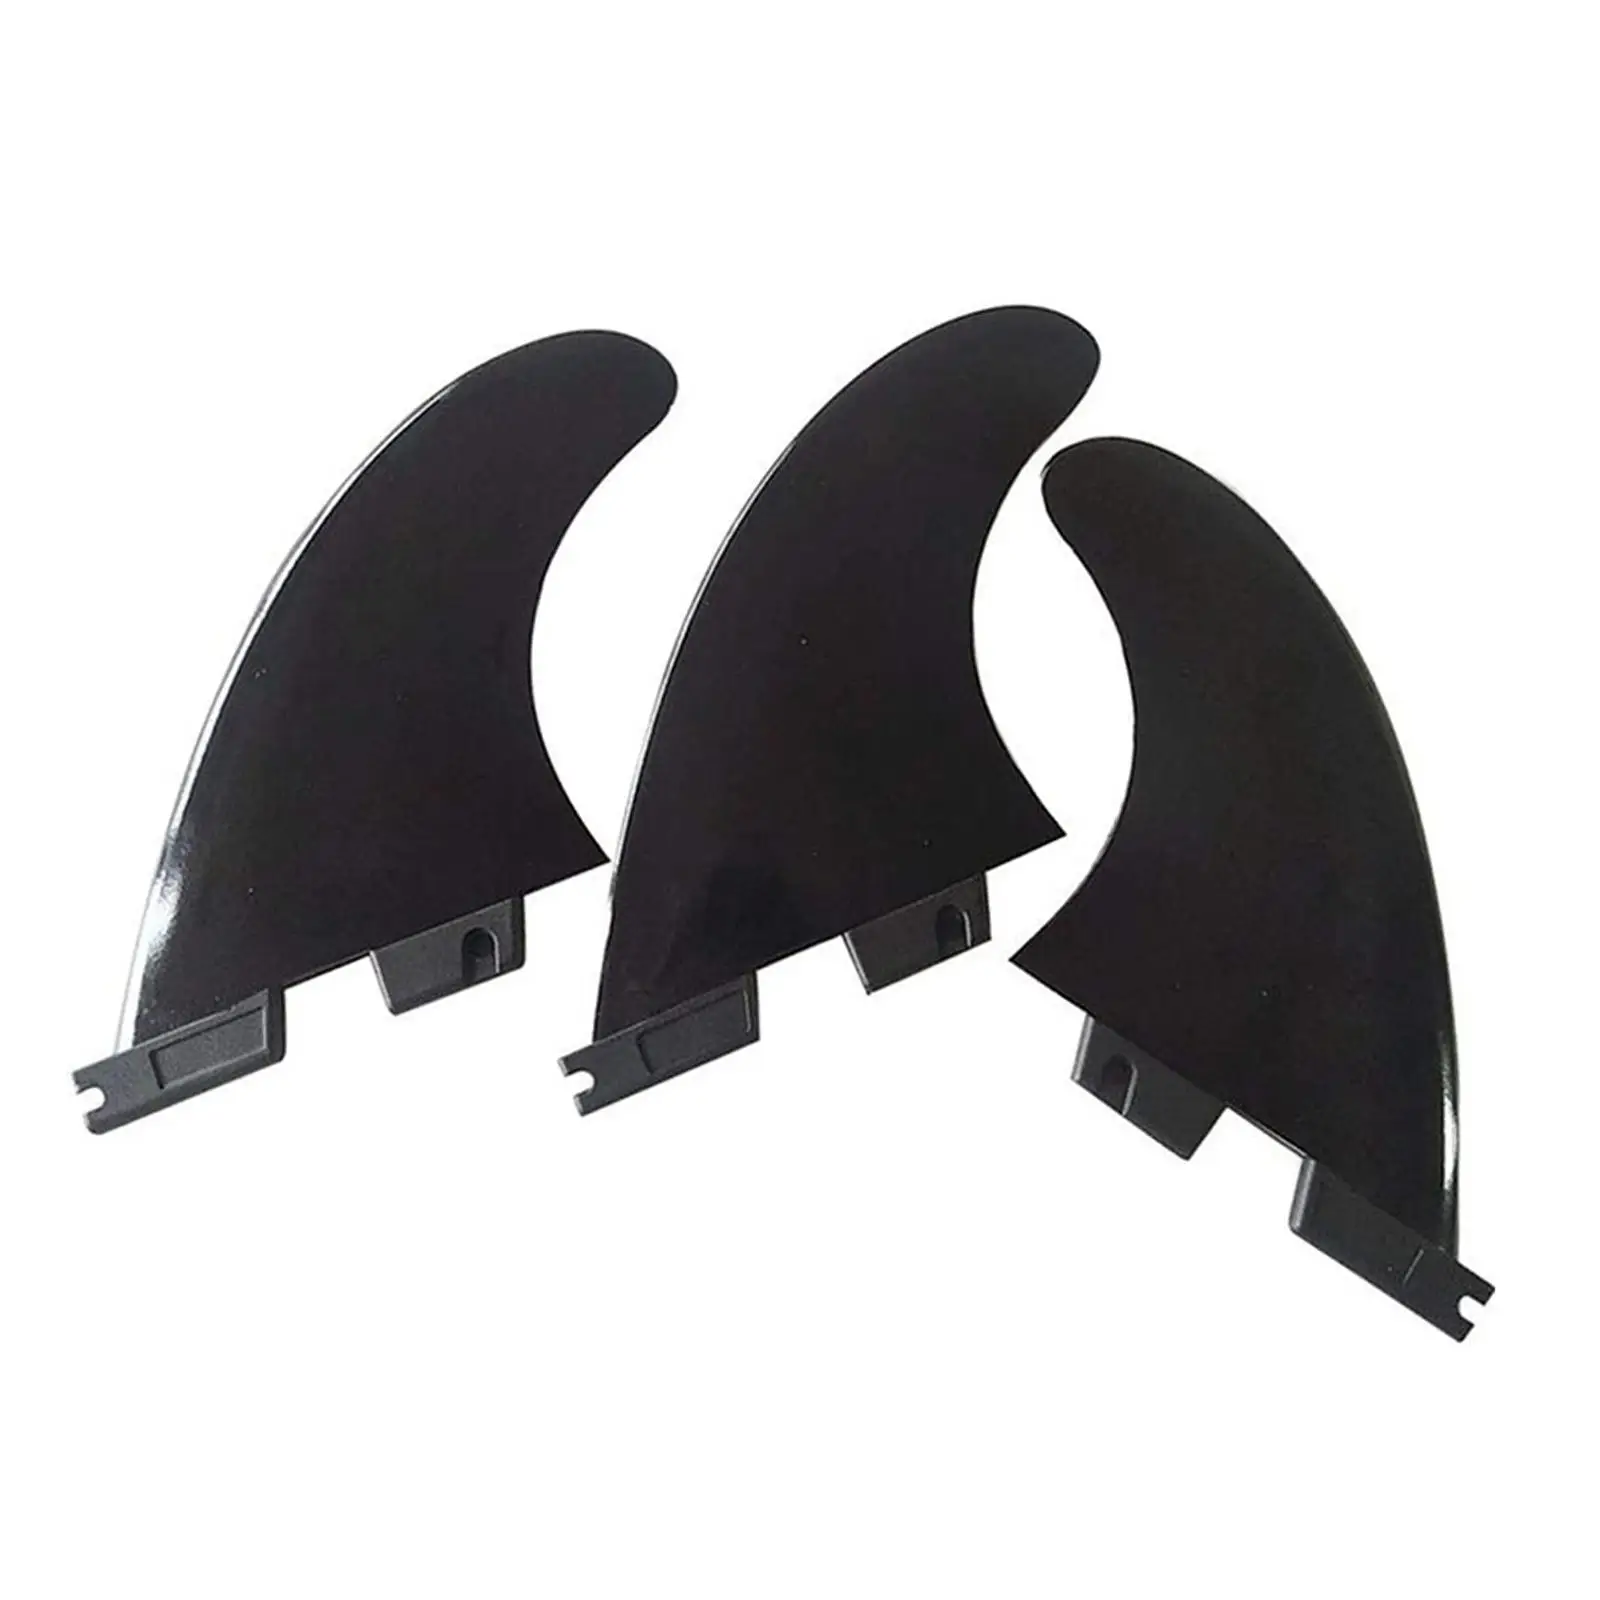 3x Surfboard Fins Surf Fin Paddleboard Fin for Water Sports Paddleboard Boat